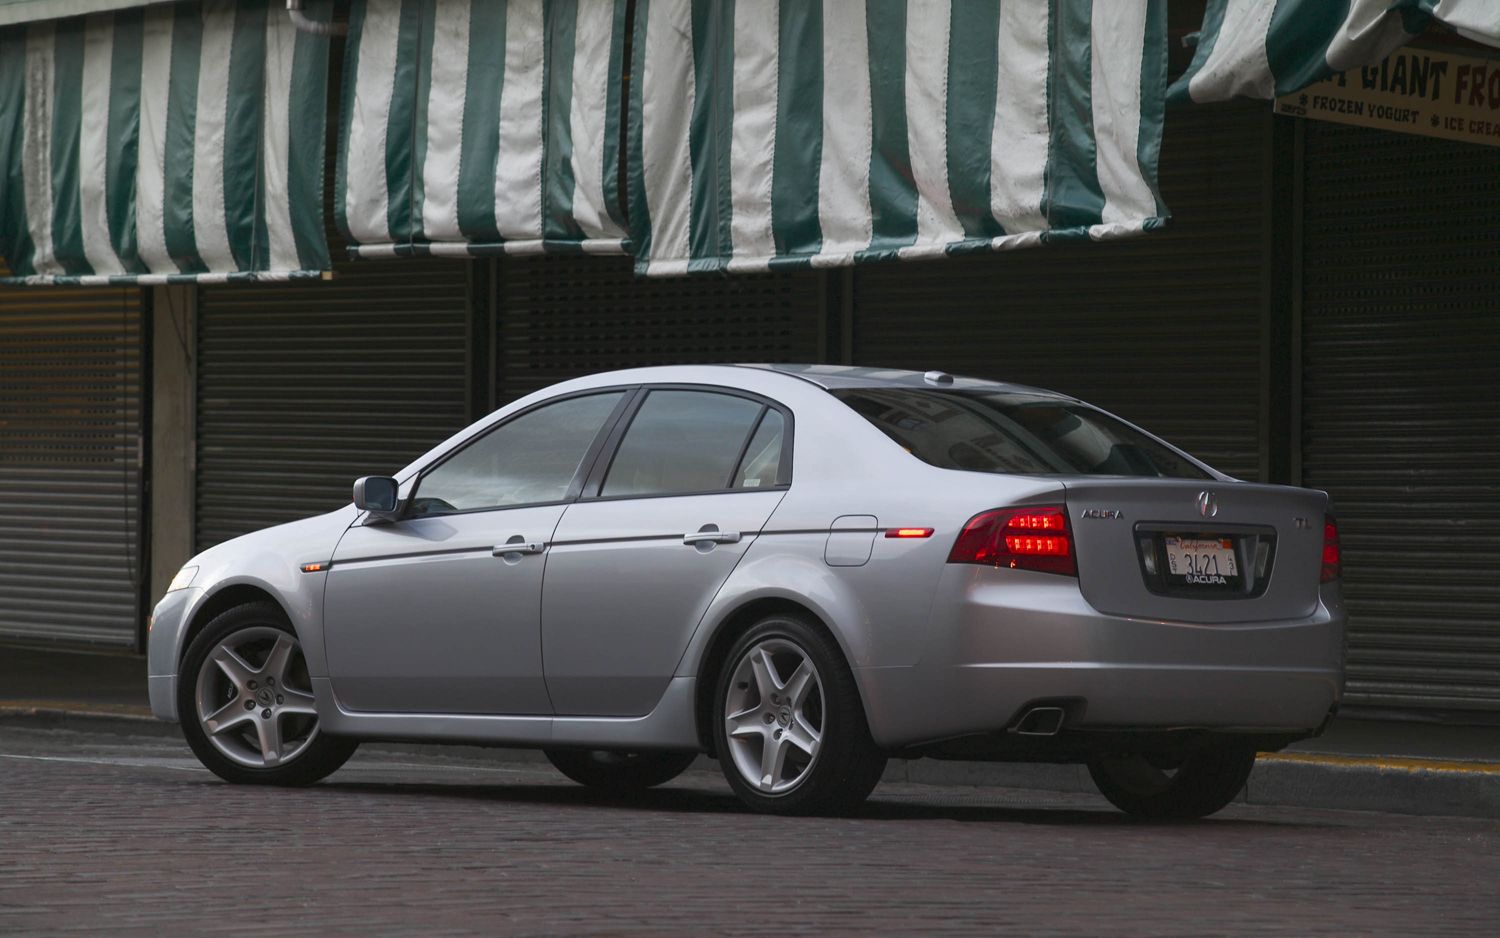 08 Acura Tl Type S 0 60 Times Top Speed Specs Quarter Mile And Wallpapers Mycarspecs United States Usa